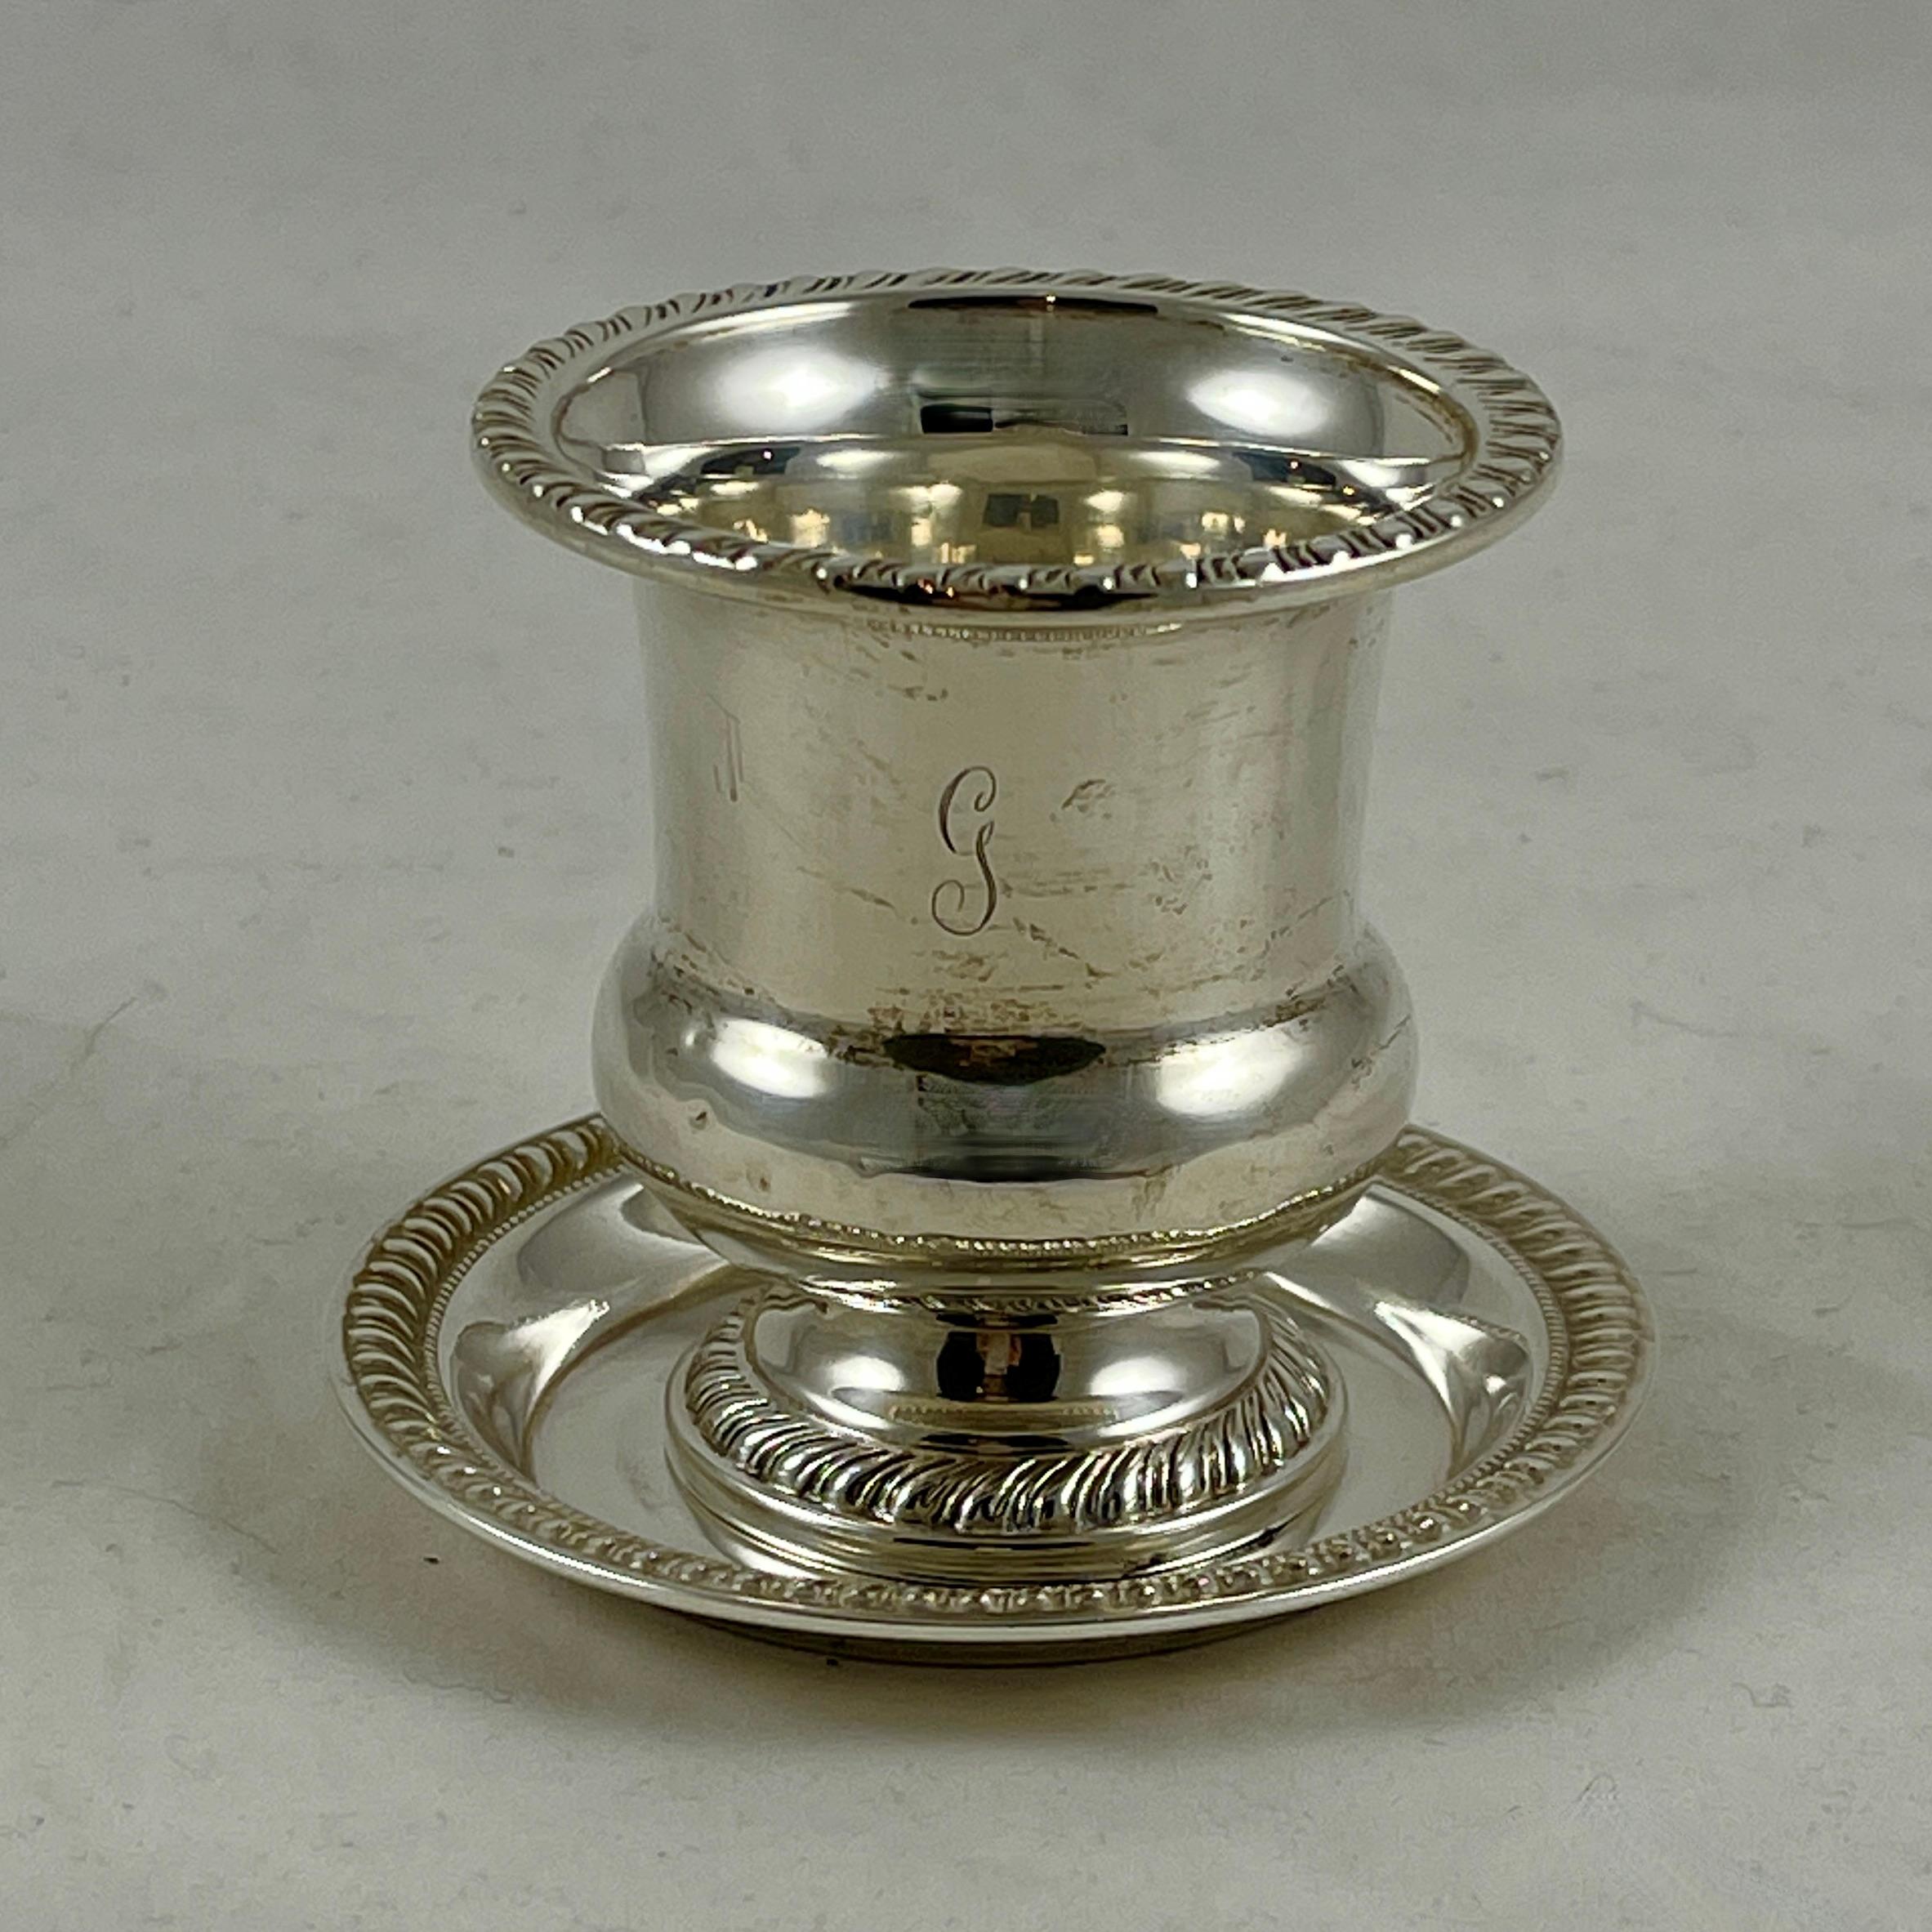 A two-piece sterling silver smoke set, Mueck-Carey Silver Co. New York, New York, circa 1940-1950s.

Suitable as a match holder with a spent tray, finished with gadroon edging. Both pieces show a faintly engraved initial ‘G.’

1.616 Troy ounces